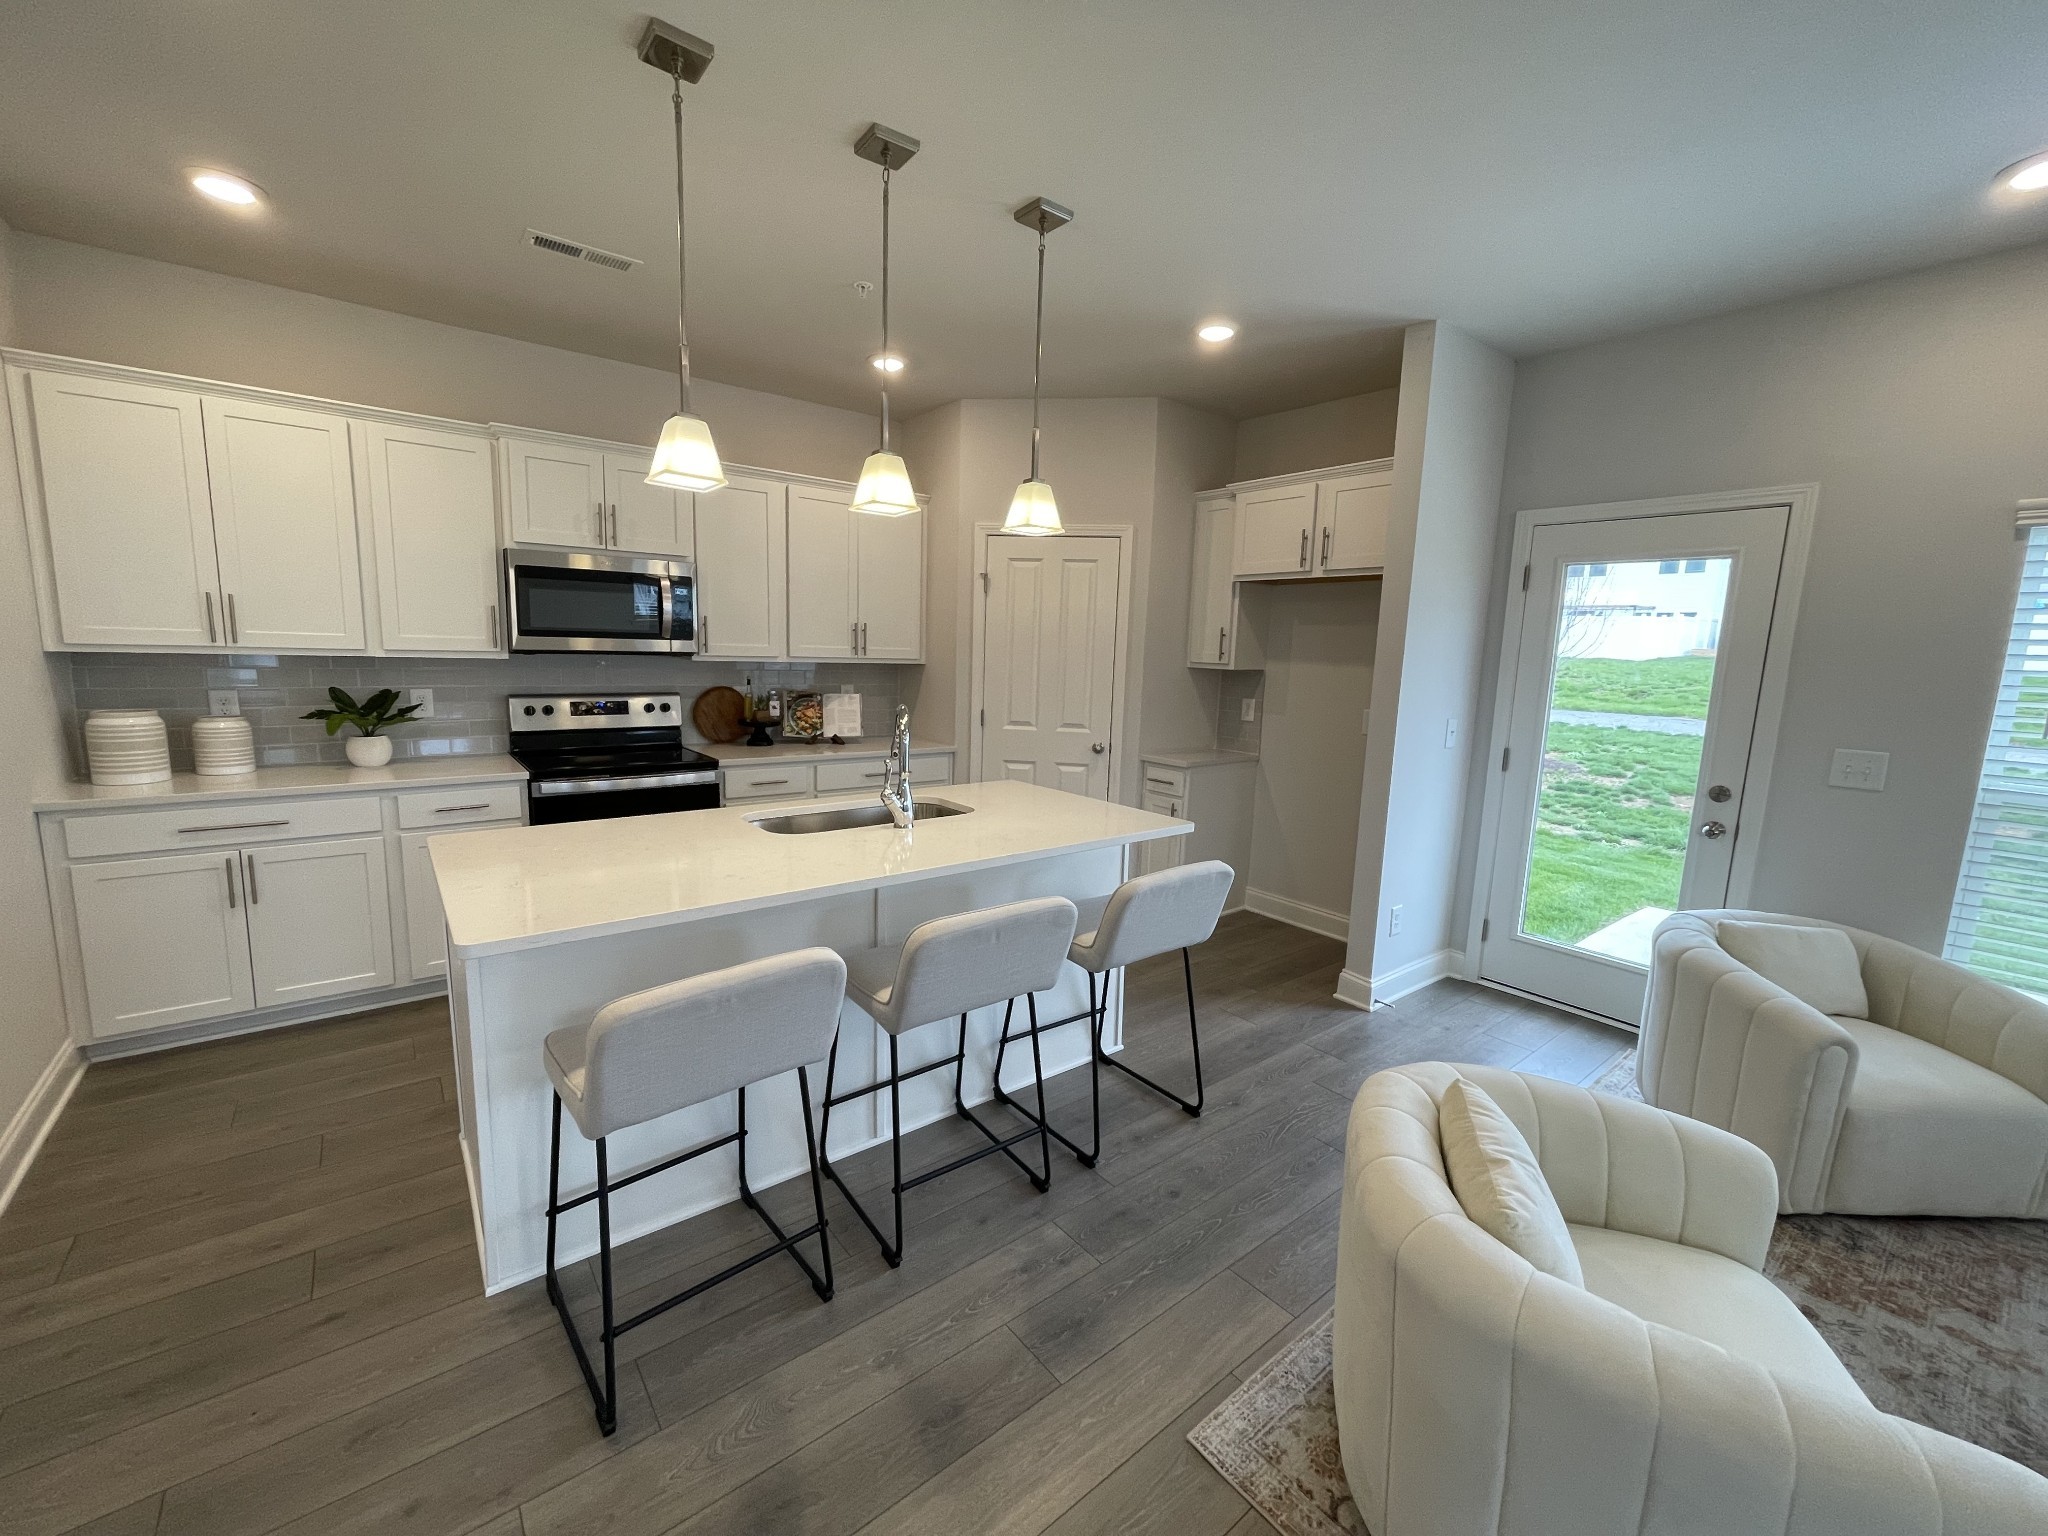 a kitchen with kitchen island a white counter top space a sink stainless steel appliances and cabinets